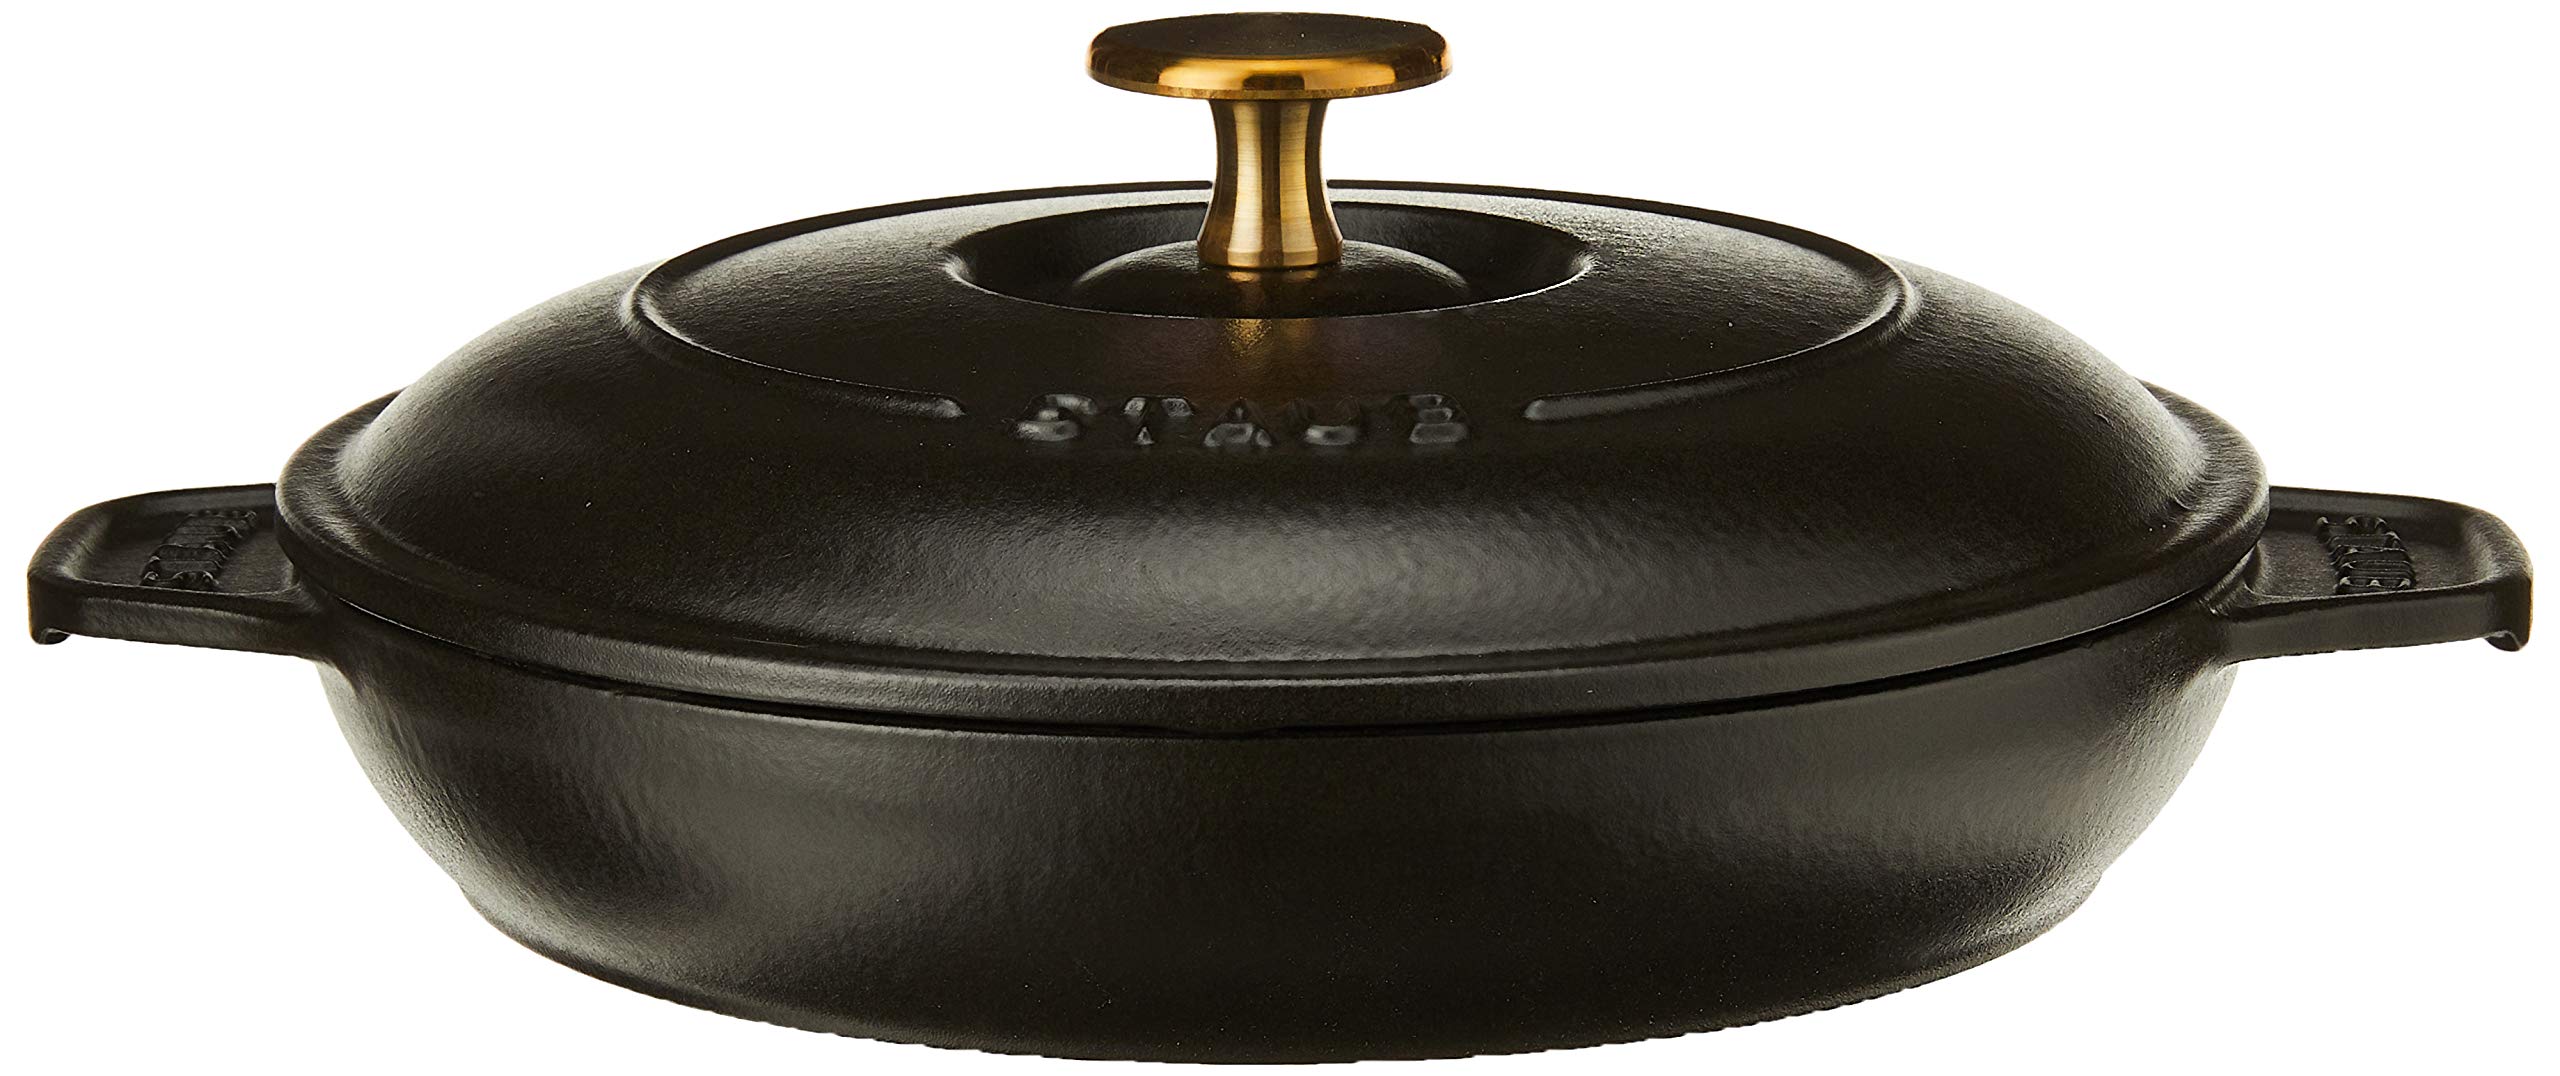 Staub Cast Iron 7.9-inch Round Covered Baking Dish - Matte Black, Made in France